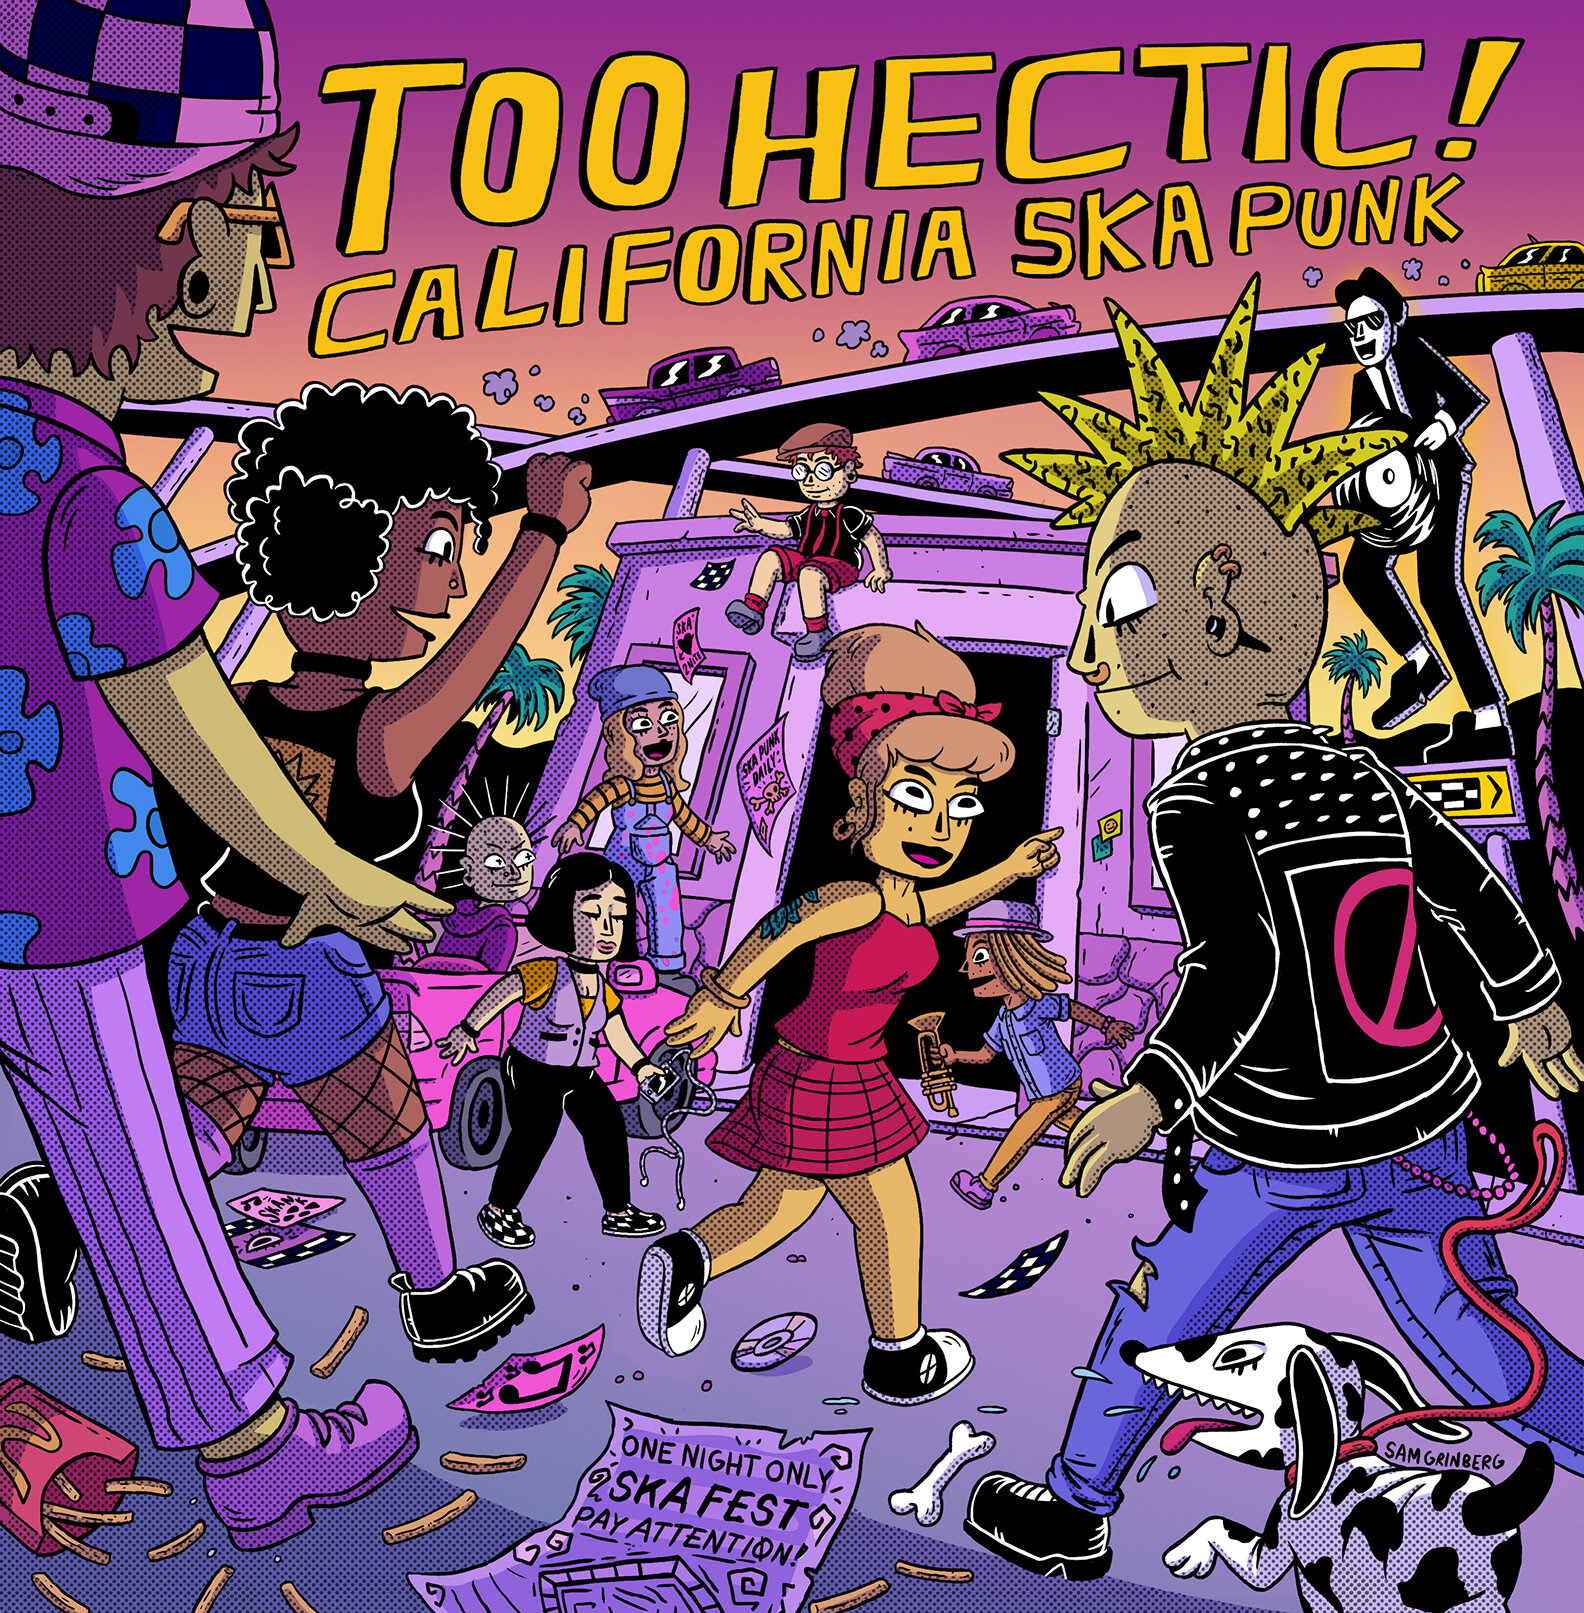  Album design, illustration, and layout for Too Hectic! California Ska Punk, 17 track compilation available on Vinyl, CD, and Casette 